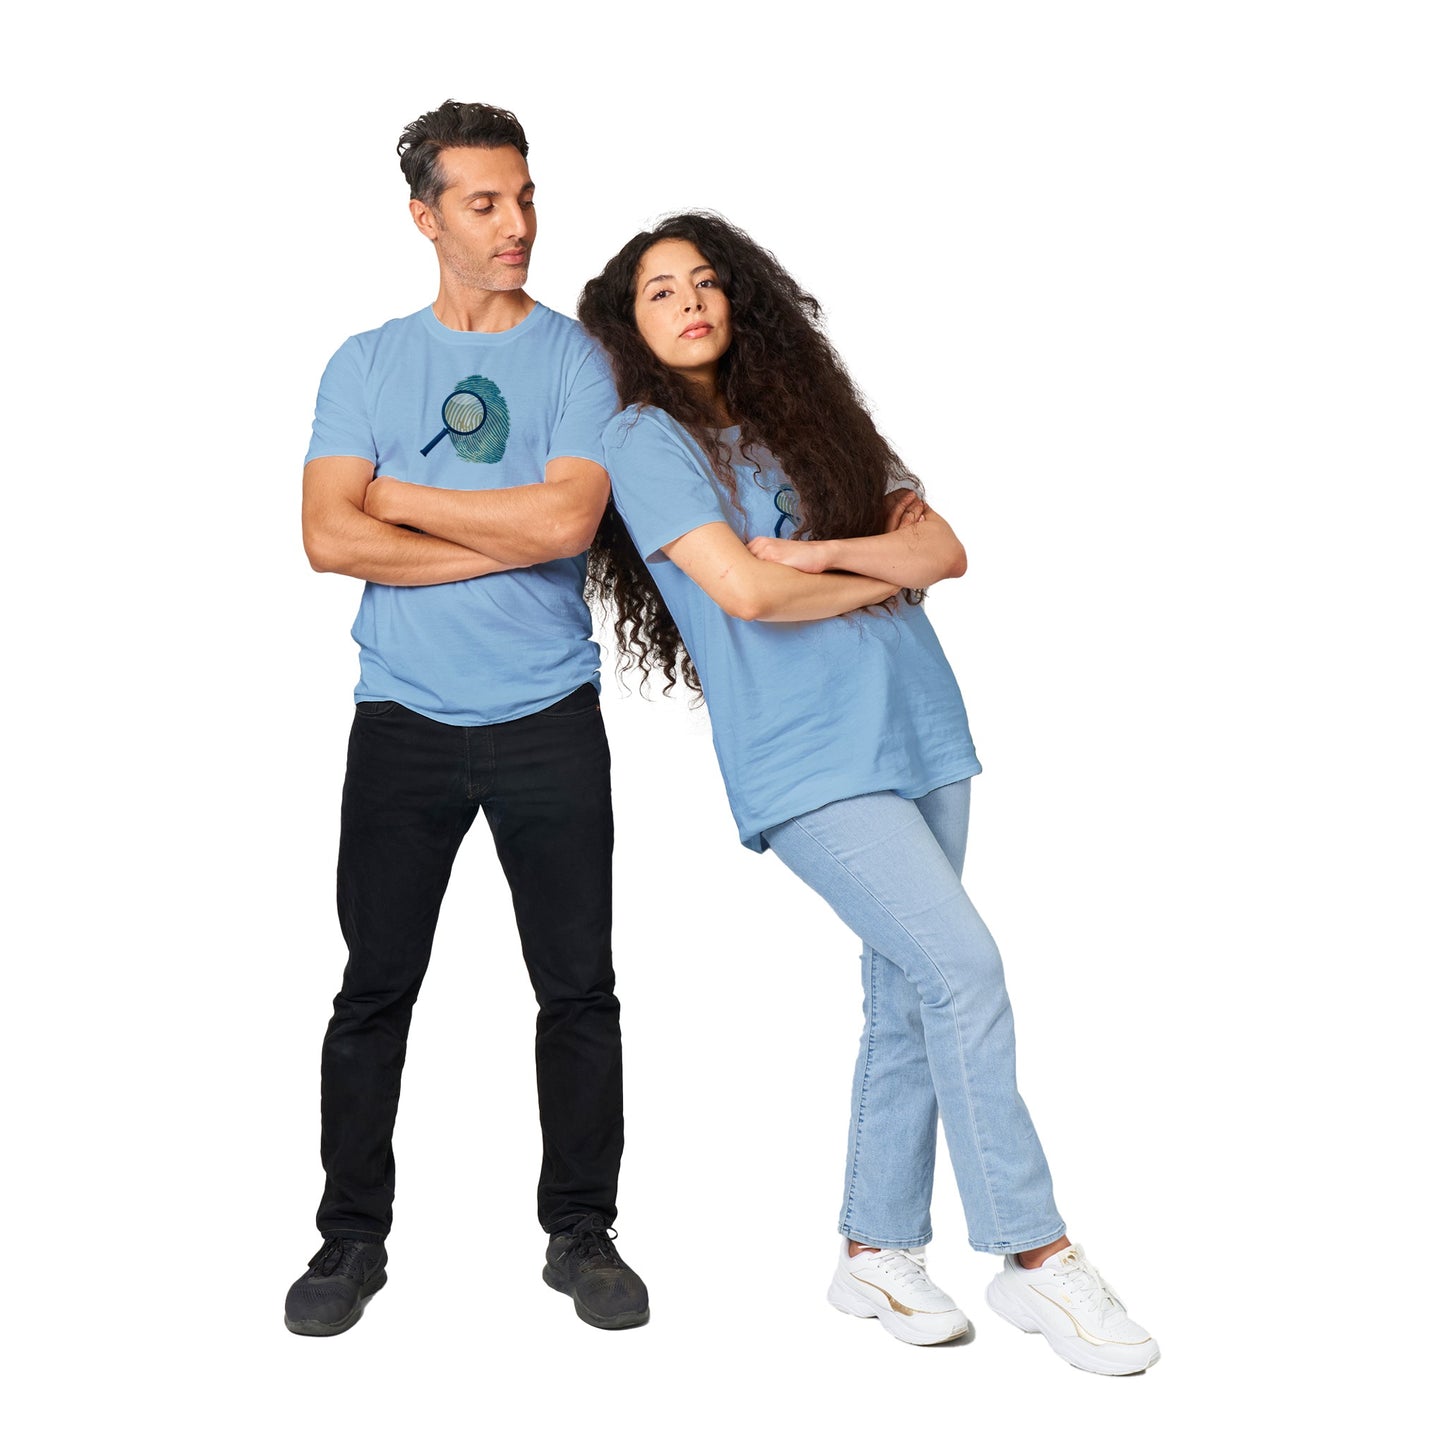 Short-Sleeve Unisex Crewneck T-shirt - Because Regular 9-to-5 Jobs Are for People Without Magnifying Glasses.